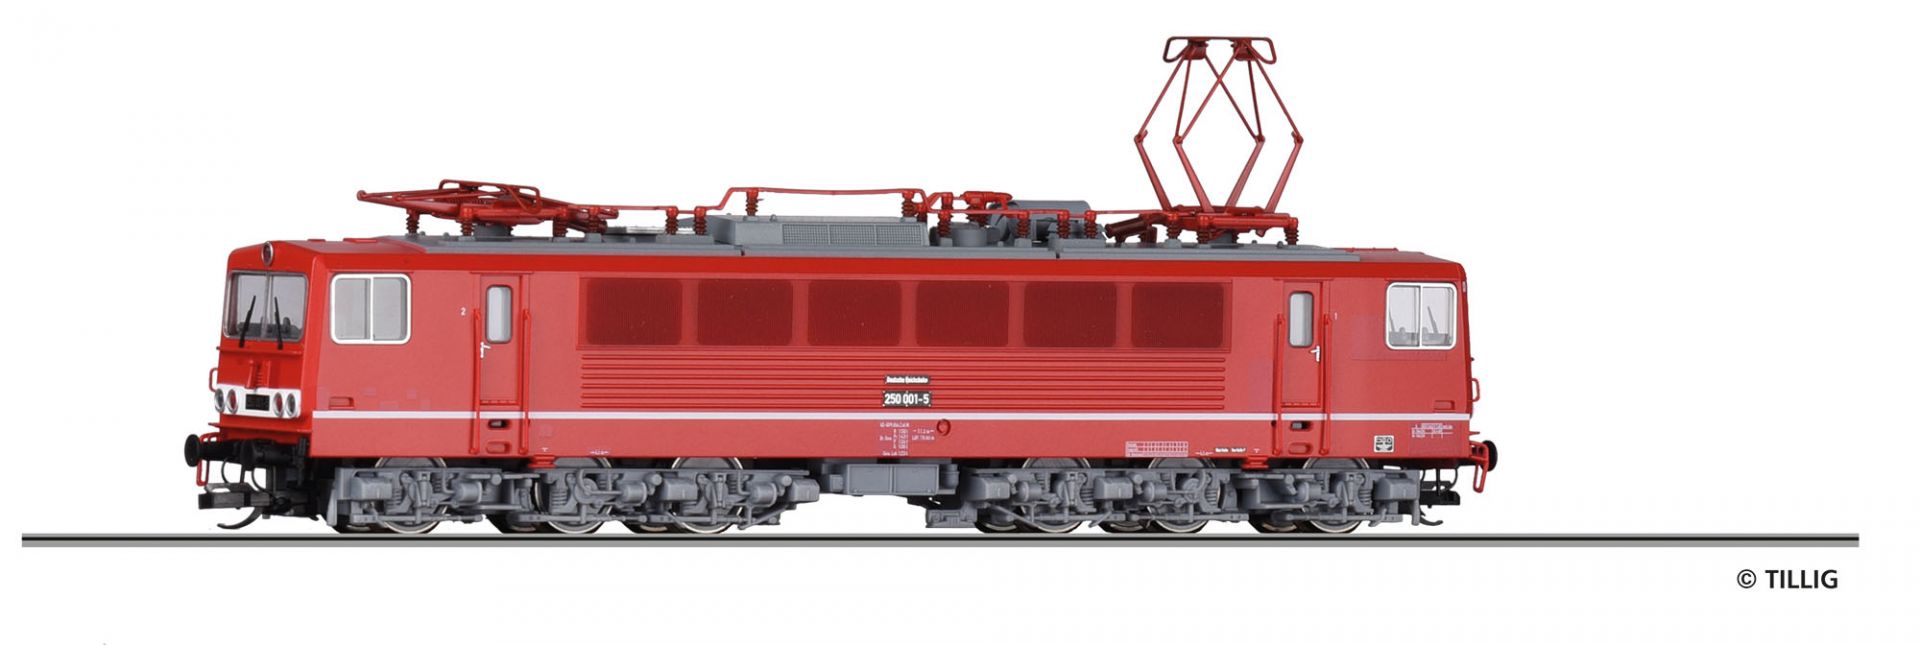 502168 | Electic locomotive DR -sold out-